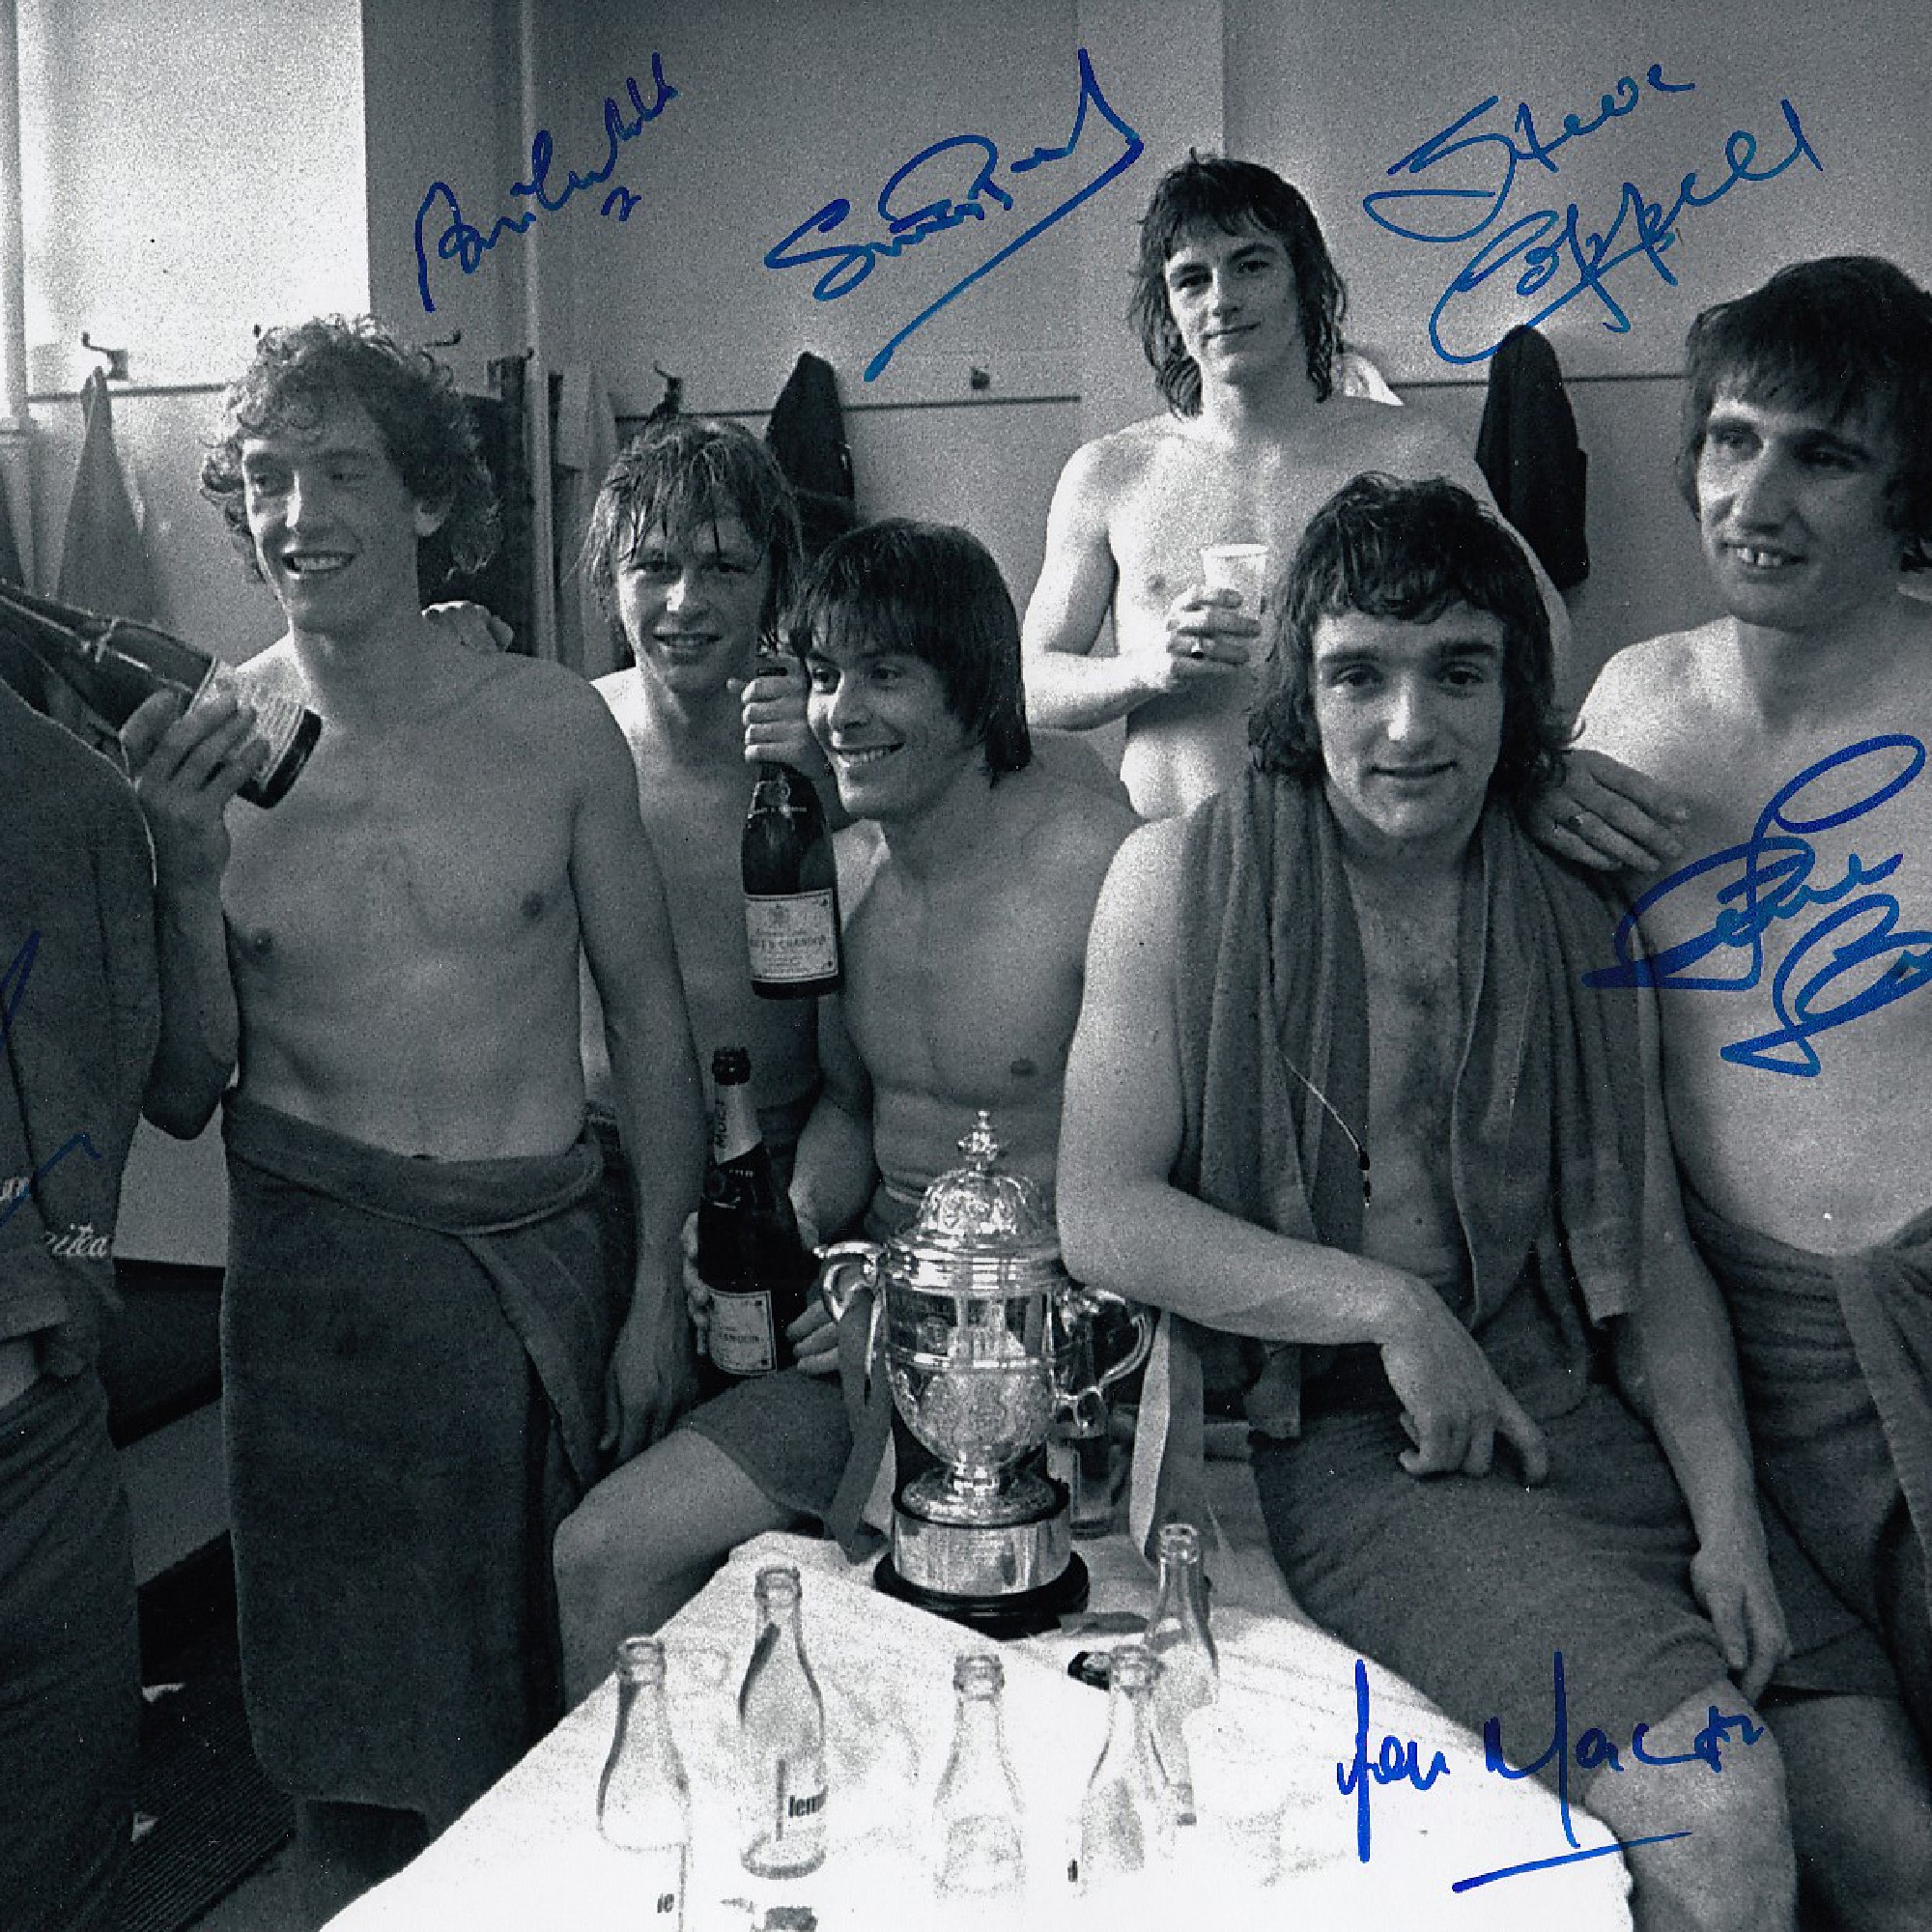 Autographed MAN UNITED 12 x 8 photo - B/W, depicting Manchester United players celebrating in the